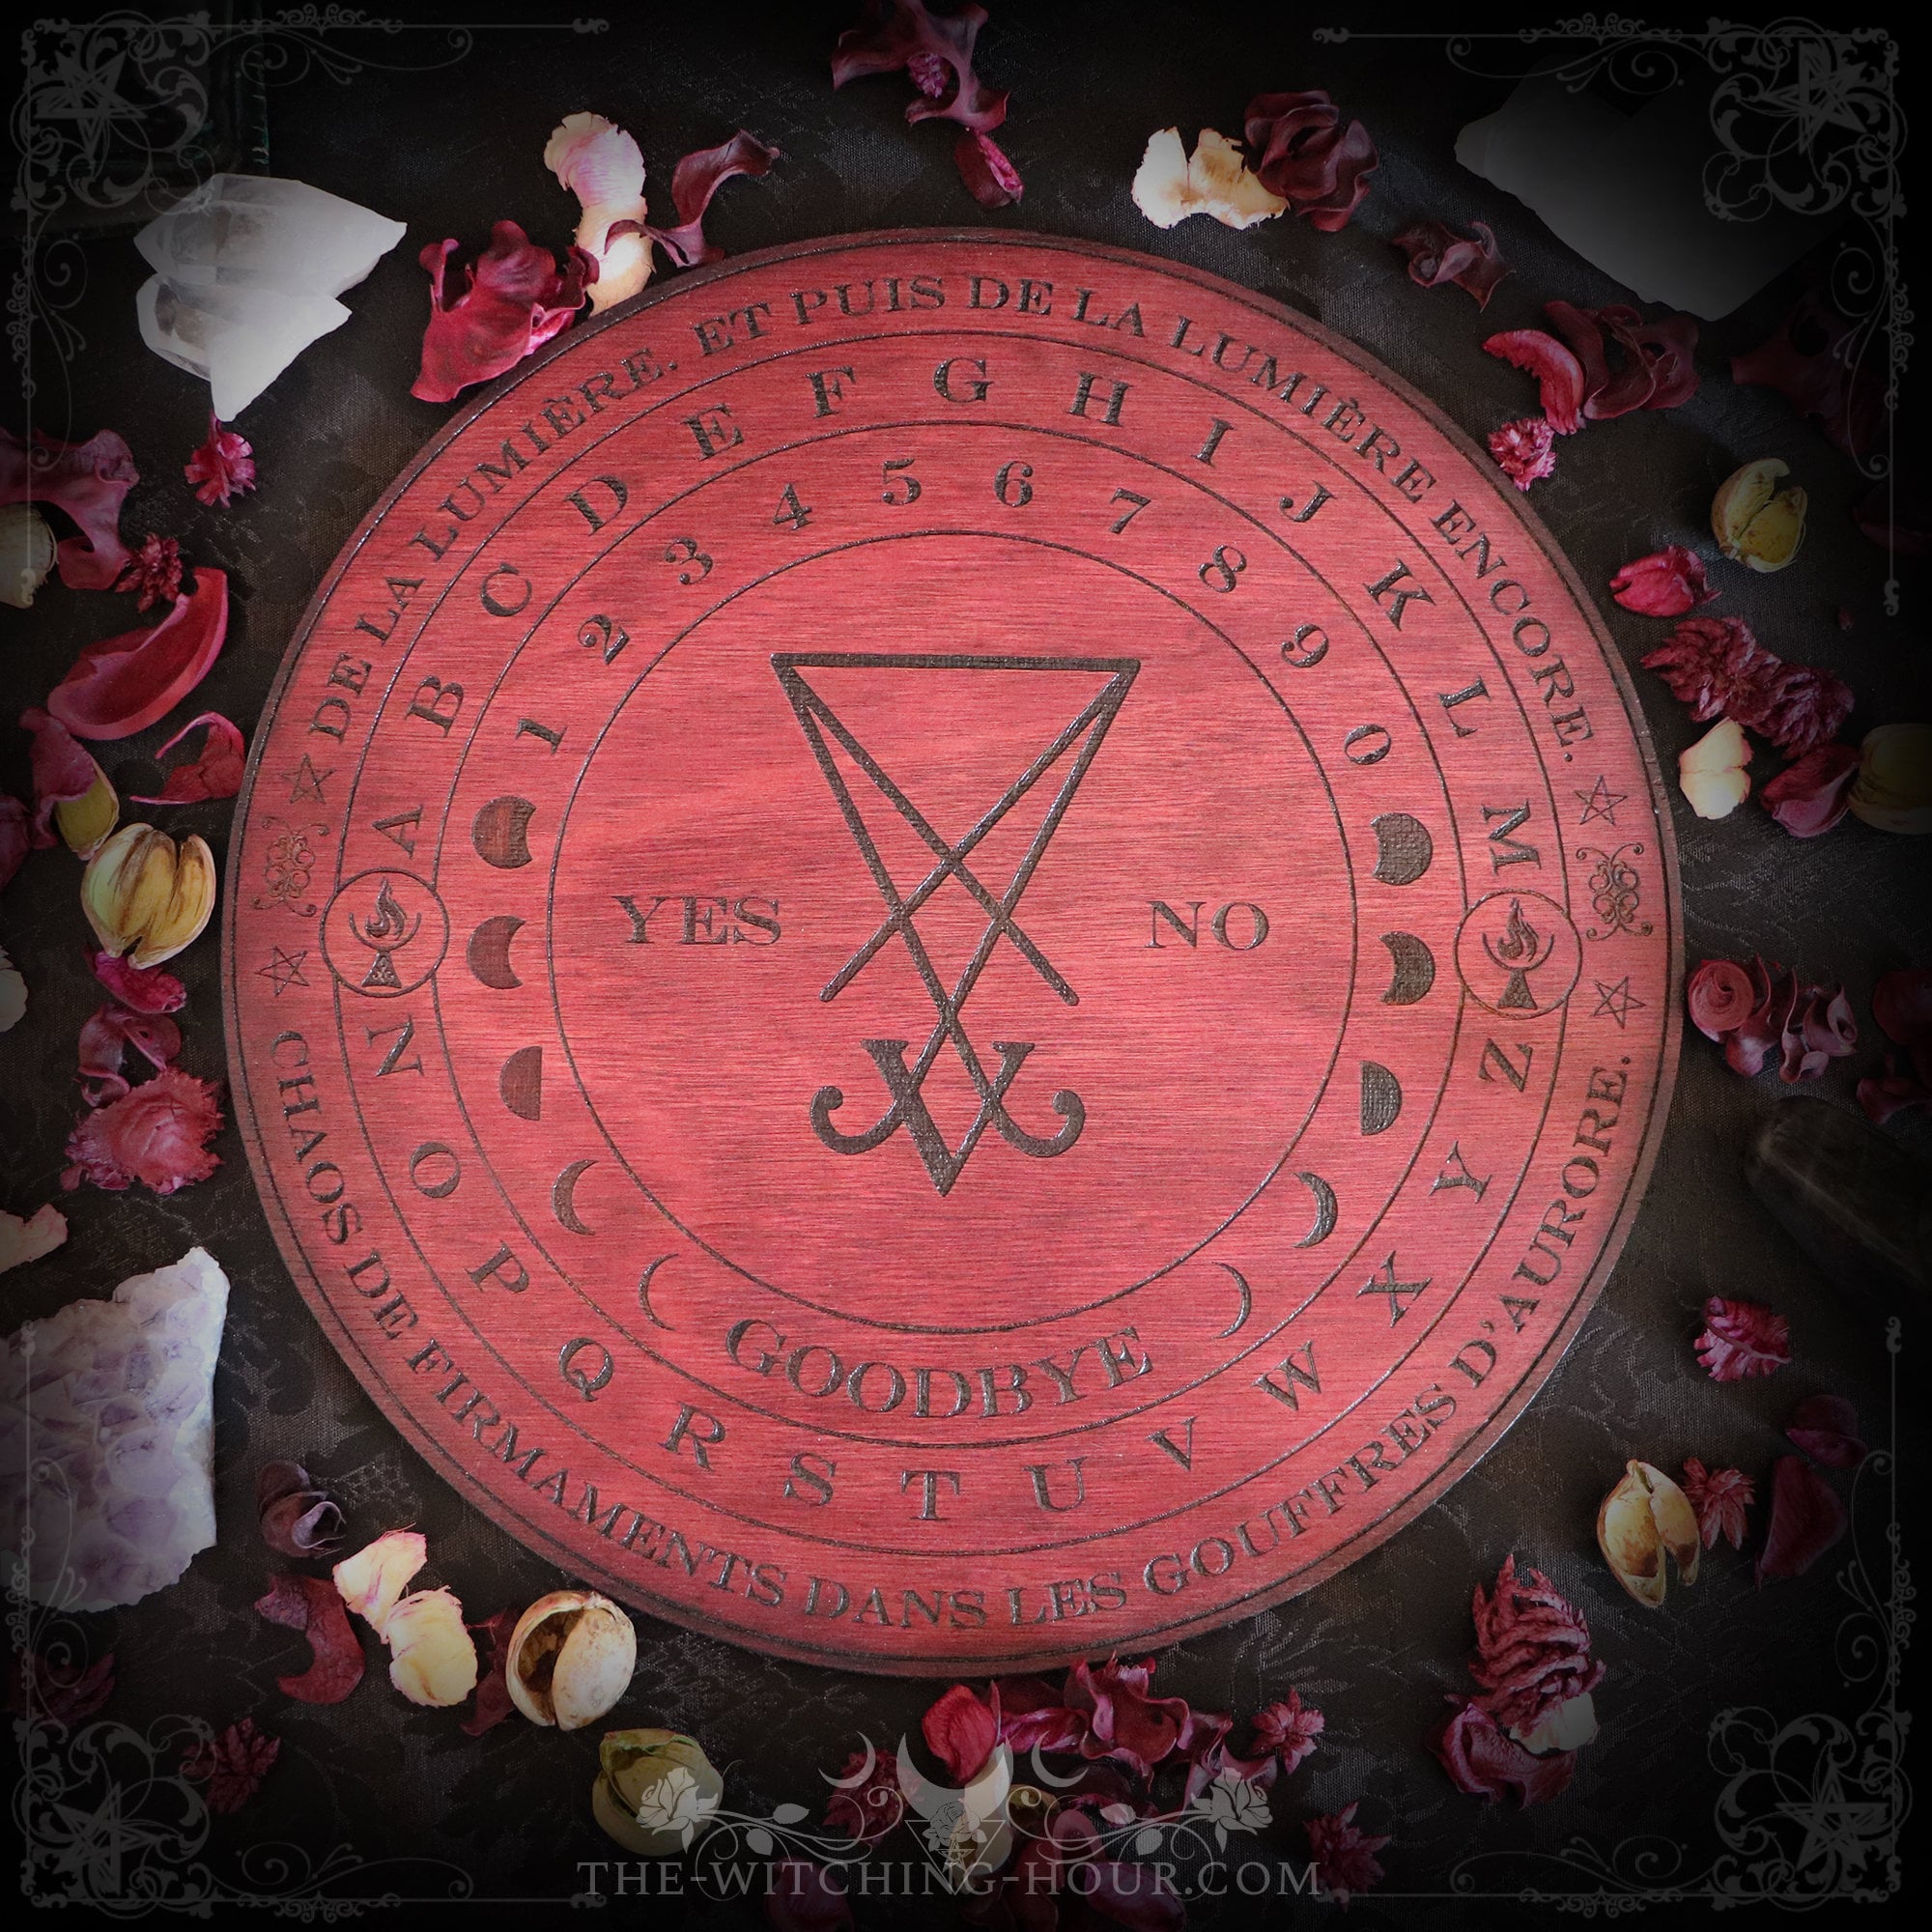 ZoZo Planchette featuring 'I Summon Thee to Come and Play with Me